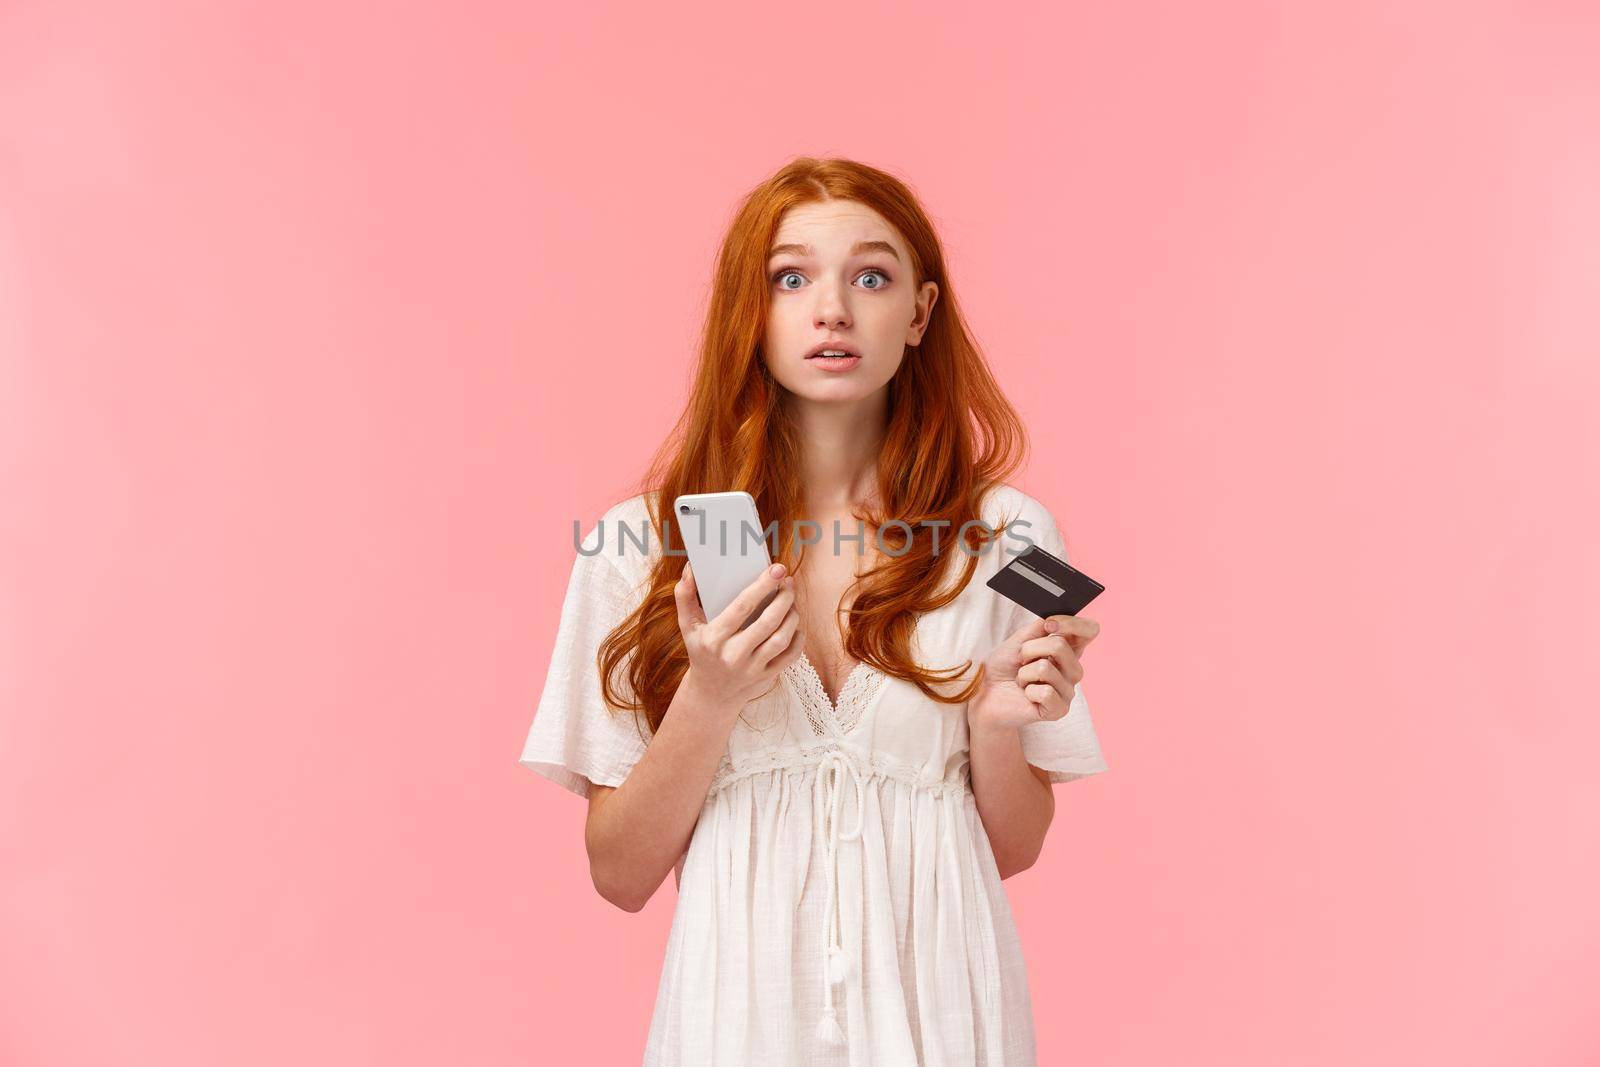 Distracted questione cute redhead girl raise head at camera to answer question, looking wondered camera, holding smartphone and credit card, trying pay for online purchase cant understand something.